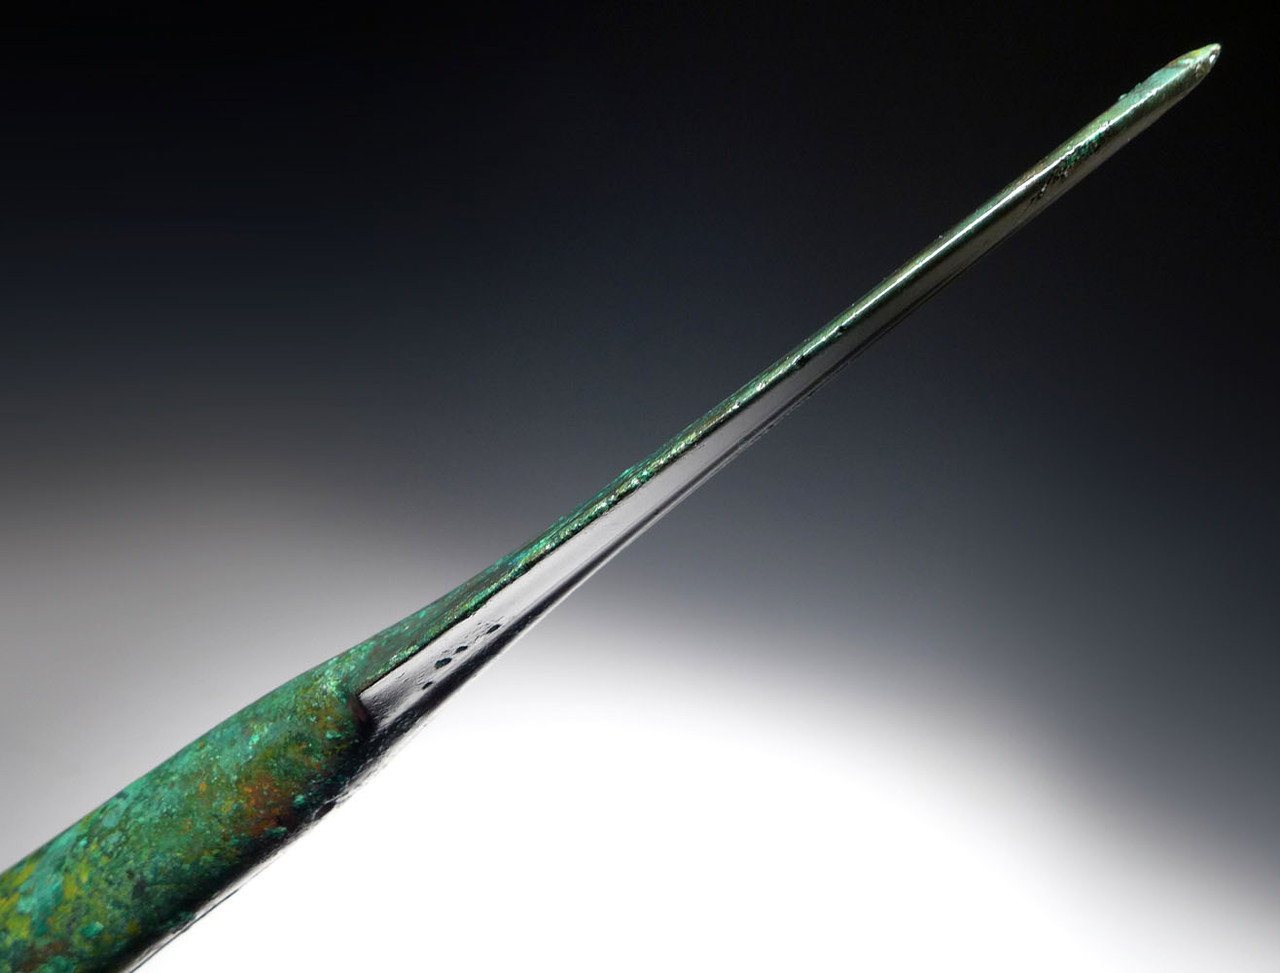 FINEST ANCIENT ACHAEMENID BRONZE THROWING JAVELIN SPEARHEAD FROM THE FIRST PERSIAN EMPIRE  *NE220